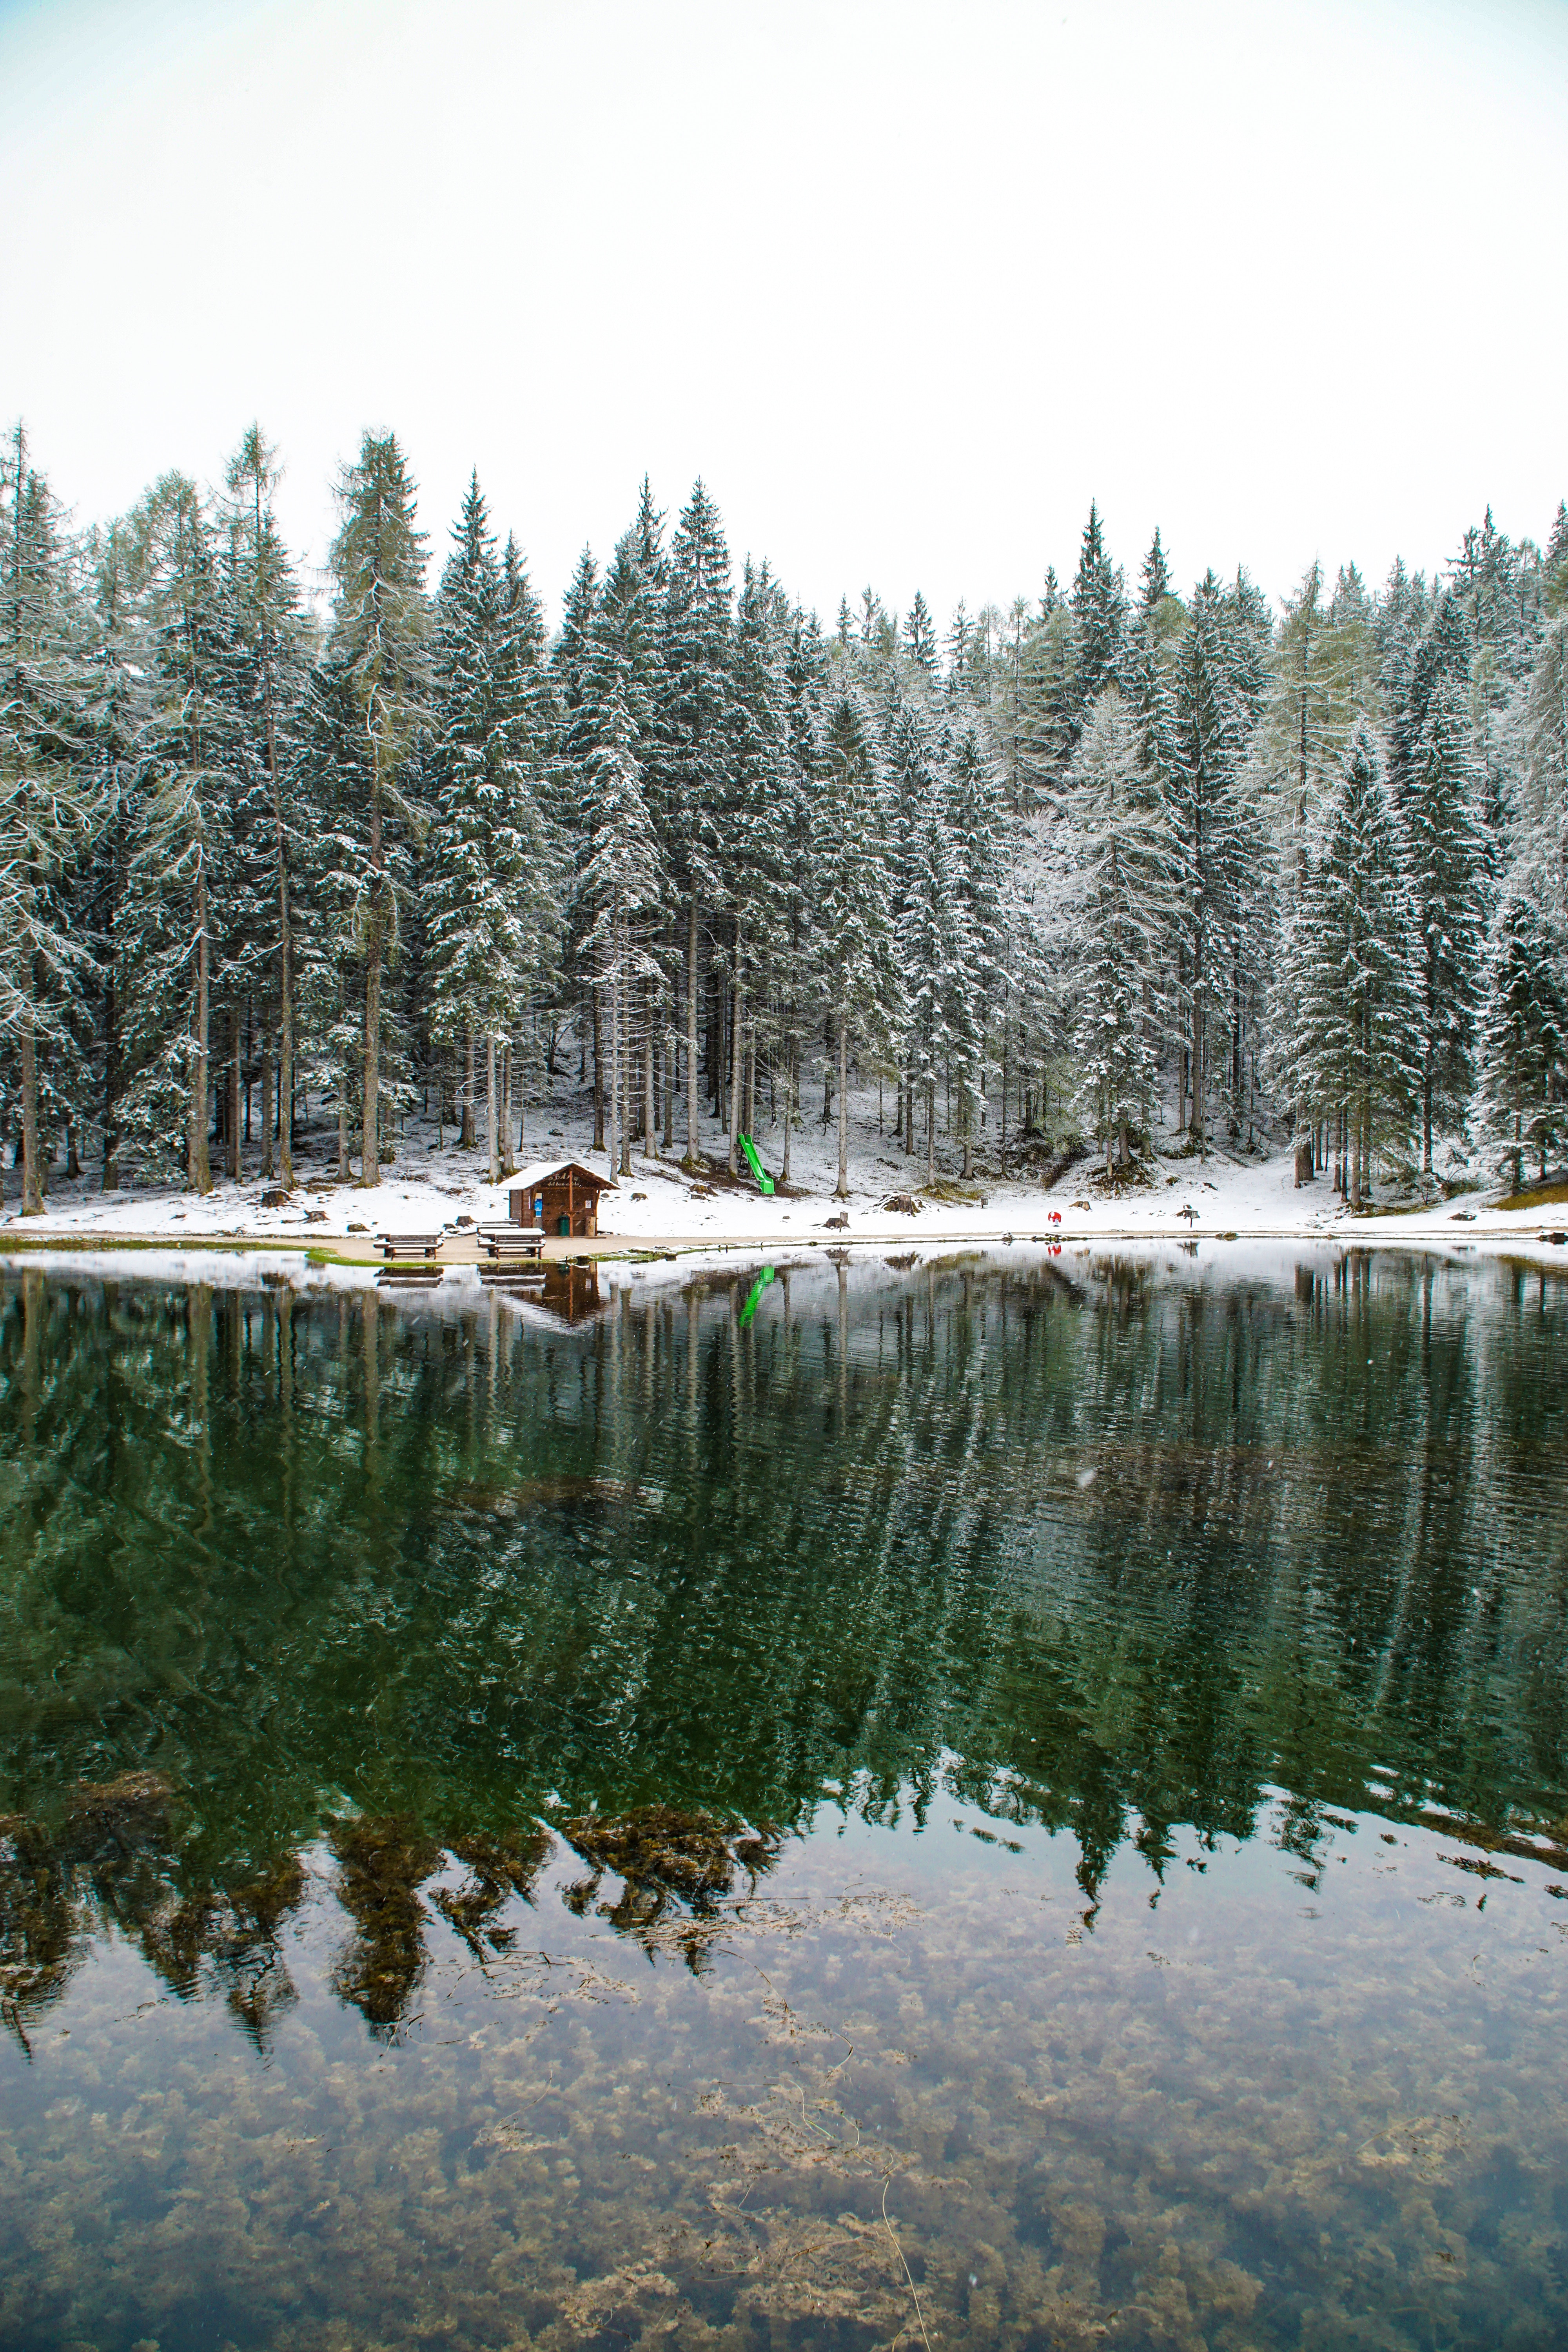 snow, small house, landscape, nature, lake, privacy, seclusion, forest, lodge images